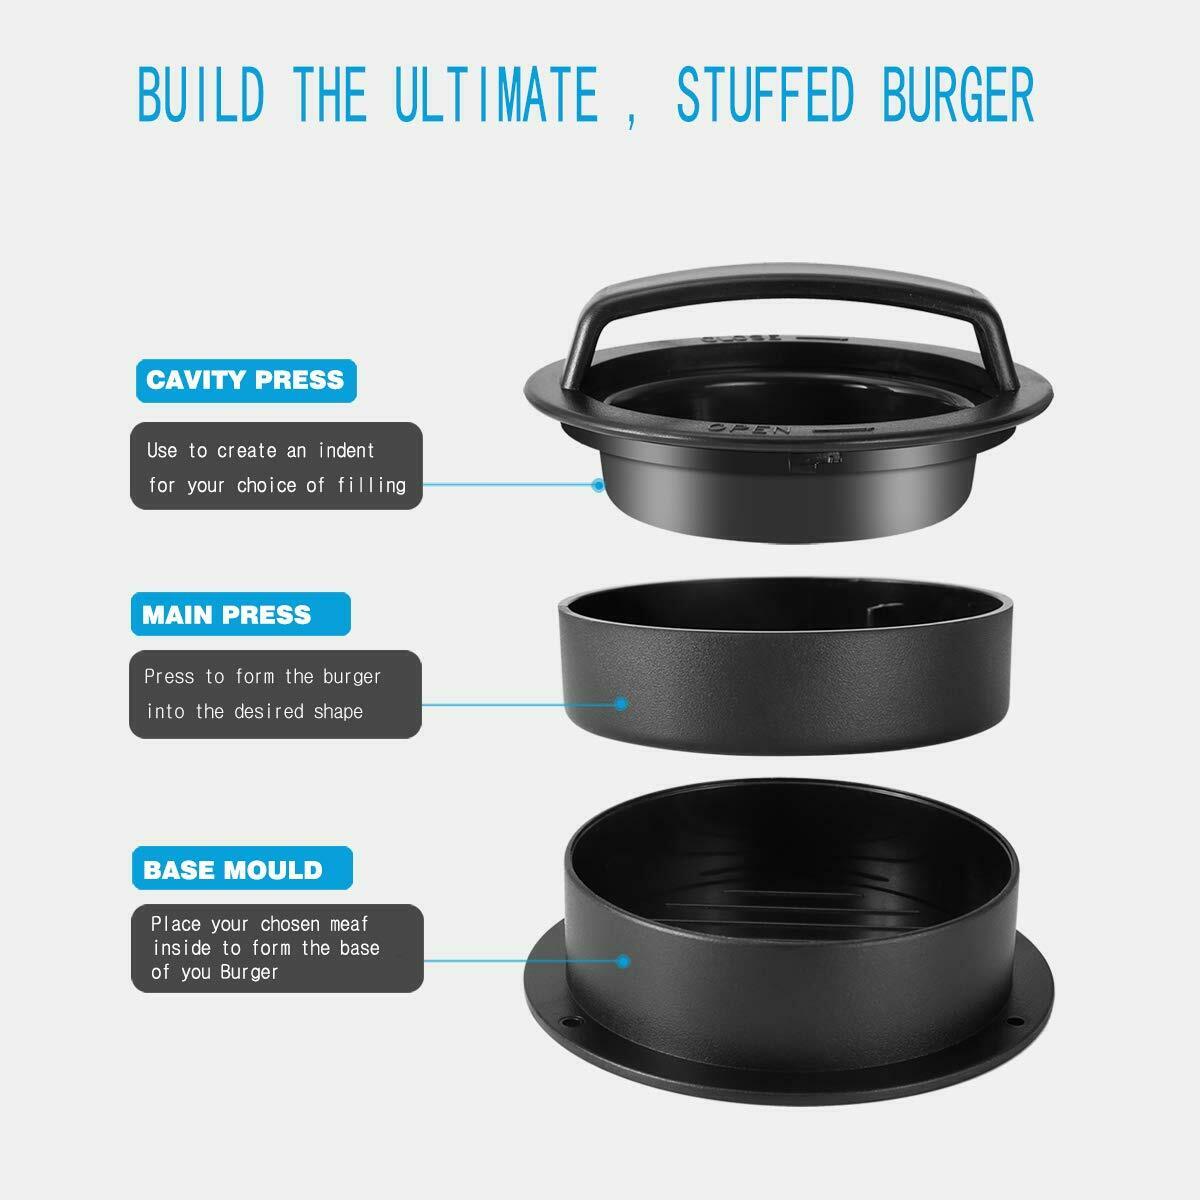 a black round container with a black handle with text: 'BUILD THE ULTIMATE , STUFFED BURGER CAVITY PRESS Use to create an indent for your choice of filling MAIN PRESS Press to form the burger into the desired shape BASE MOULD Place your chosen meaf inside to form the base of you Burger'